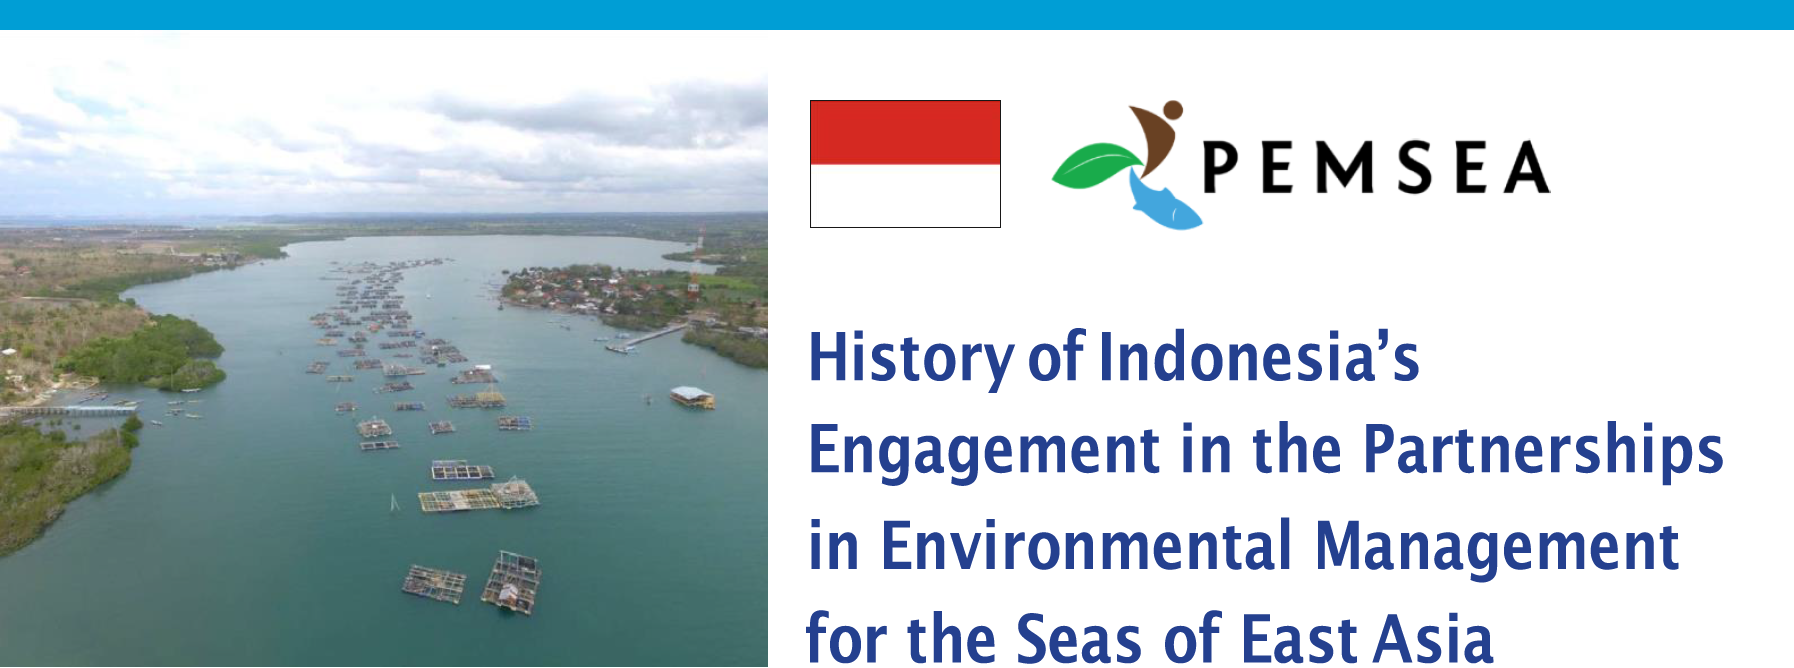 History of Indonesia's Engagement in PEMSEA